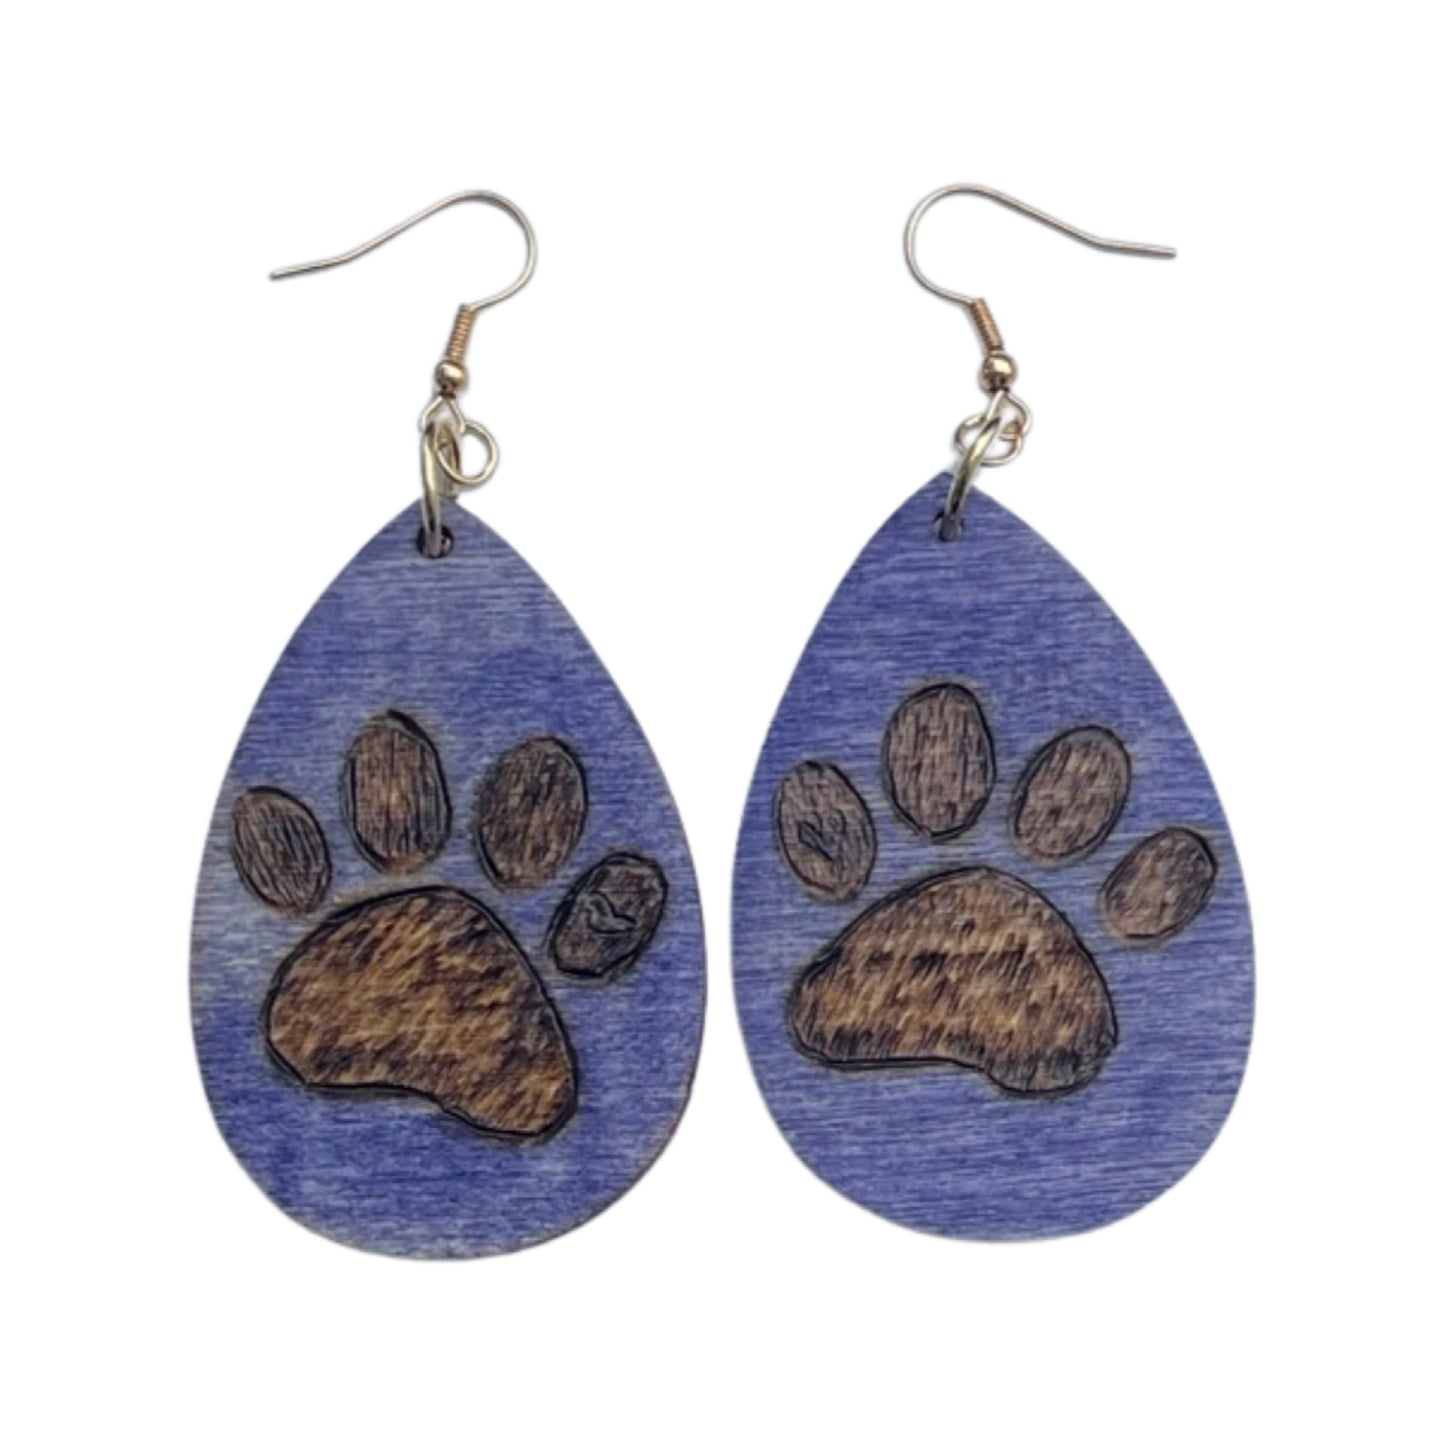 Paws Earrings Handmade Wood Burned and painted Fashion Light Weight Teardrop